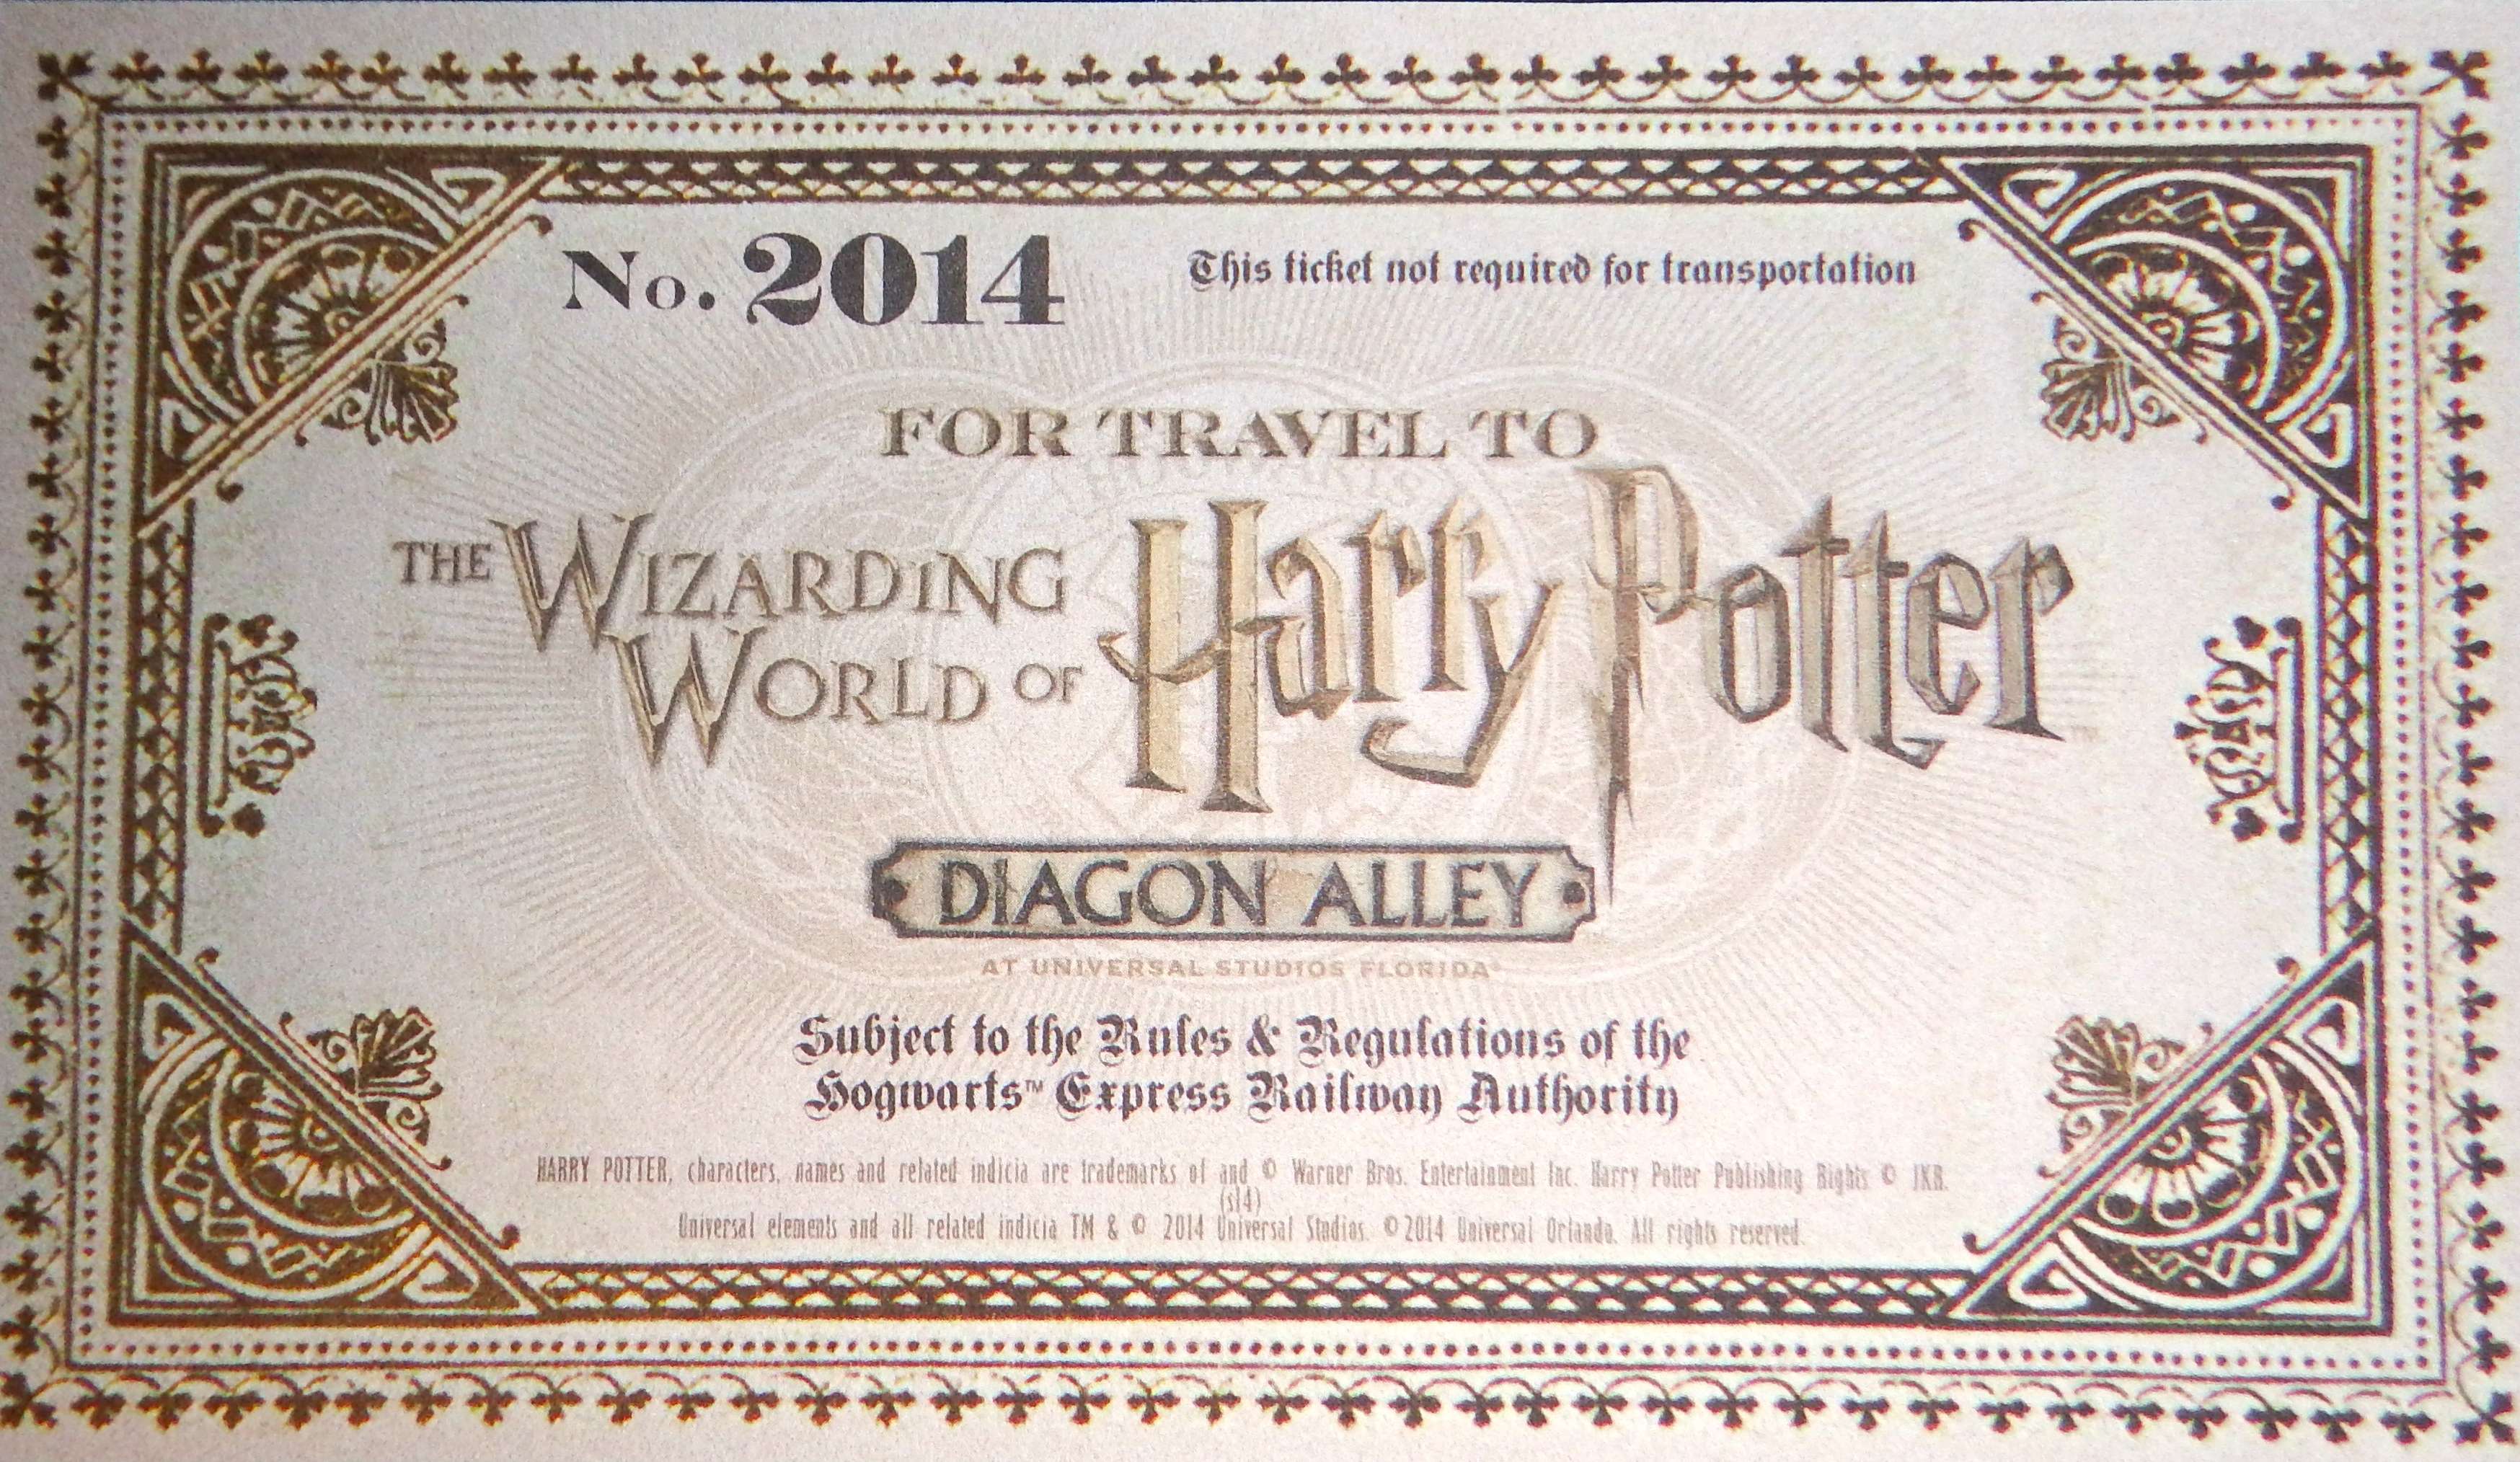 diagon-alley-invite-unboxing-for-wizarding-world-of-harry-potter